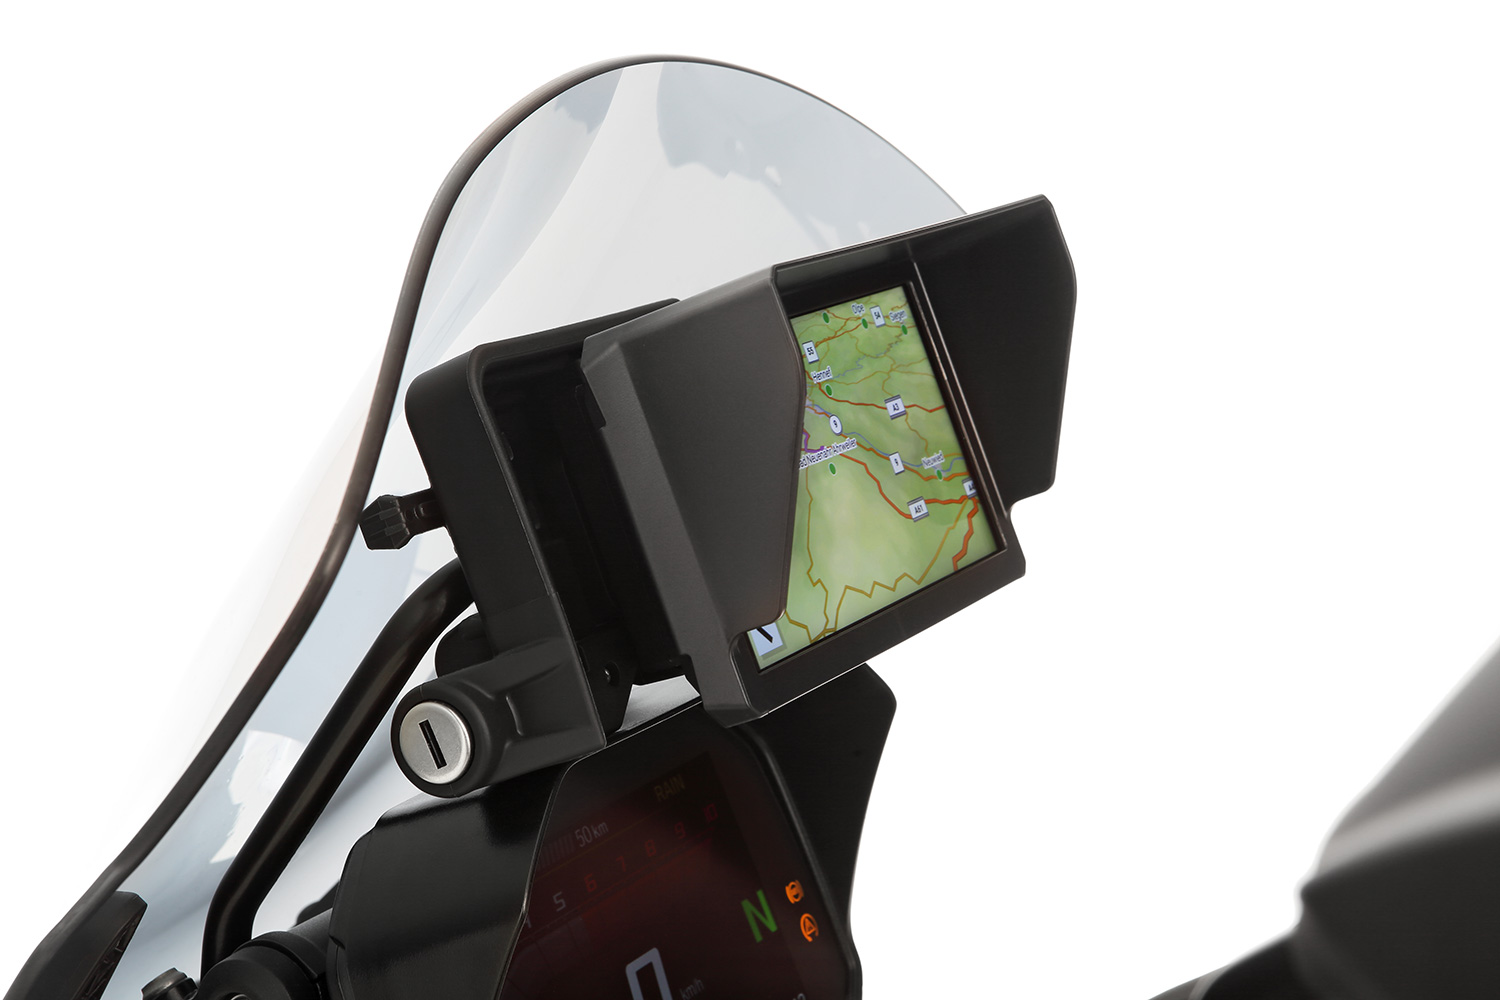 Review: Motorcycle GPS Garmin Zumo XT: review and analysis of its